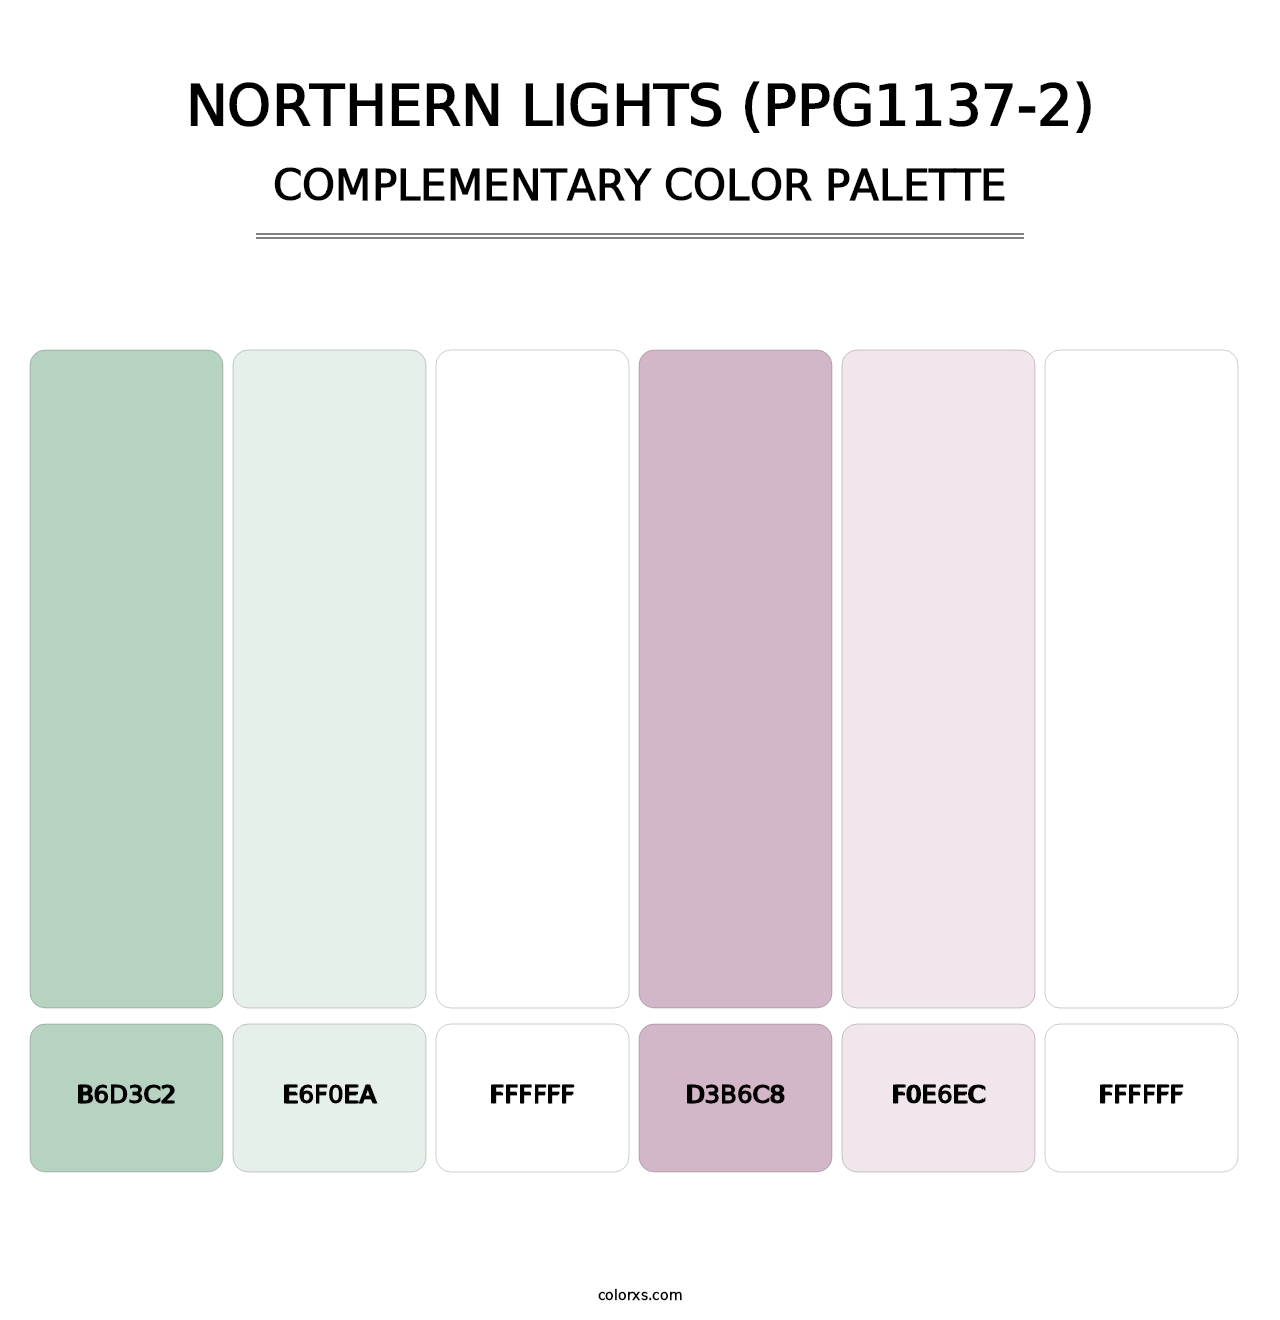 Northern Lights (PPG1137-2) - Complementary Color Palette